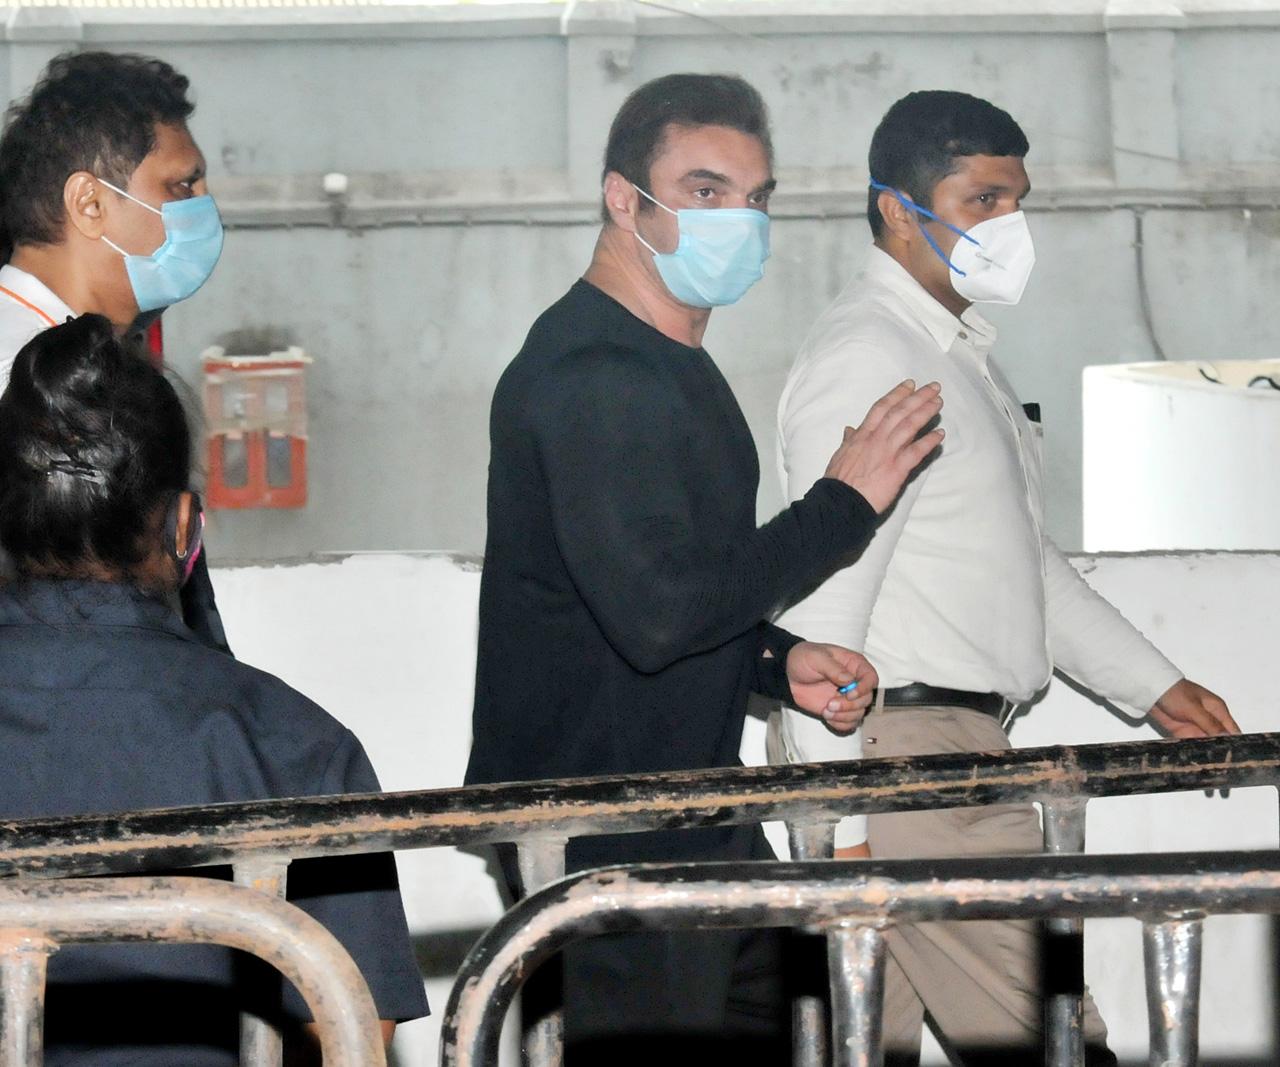 Salman's brother and actor-producer Sohail Khan also received his second shot of the Covid-19 vaccine at the Dadar centre.